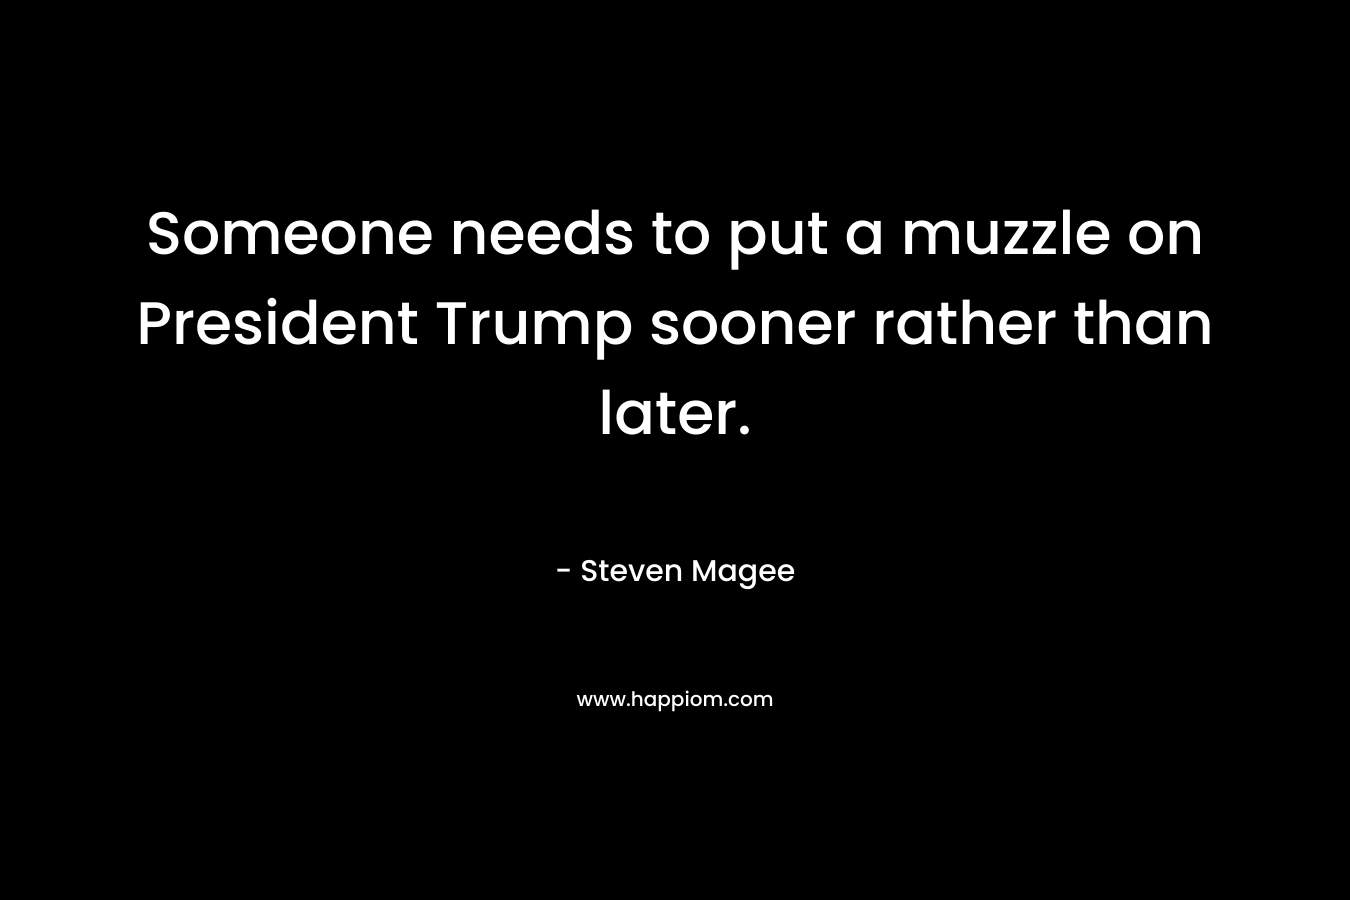 Someone needs to put a muzzle on President Trump sooner rather than later.